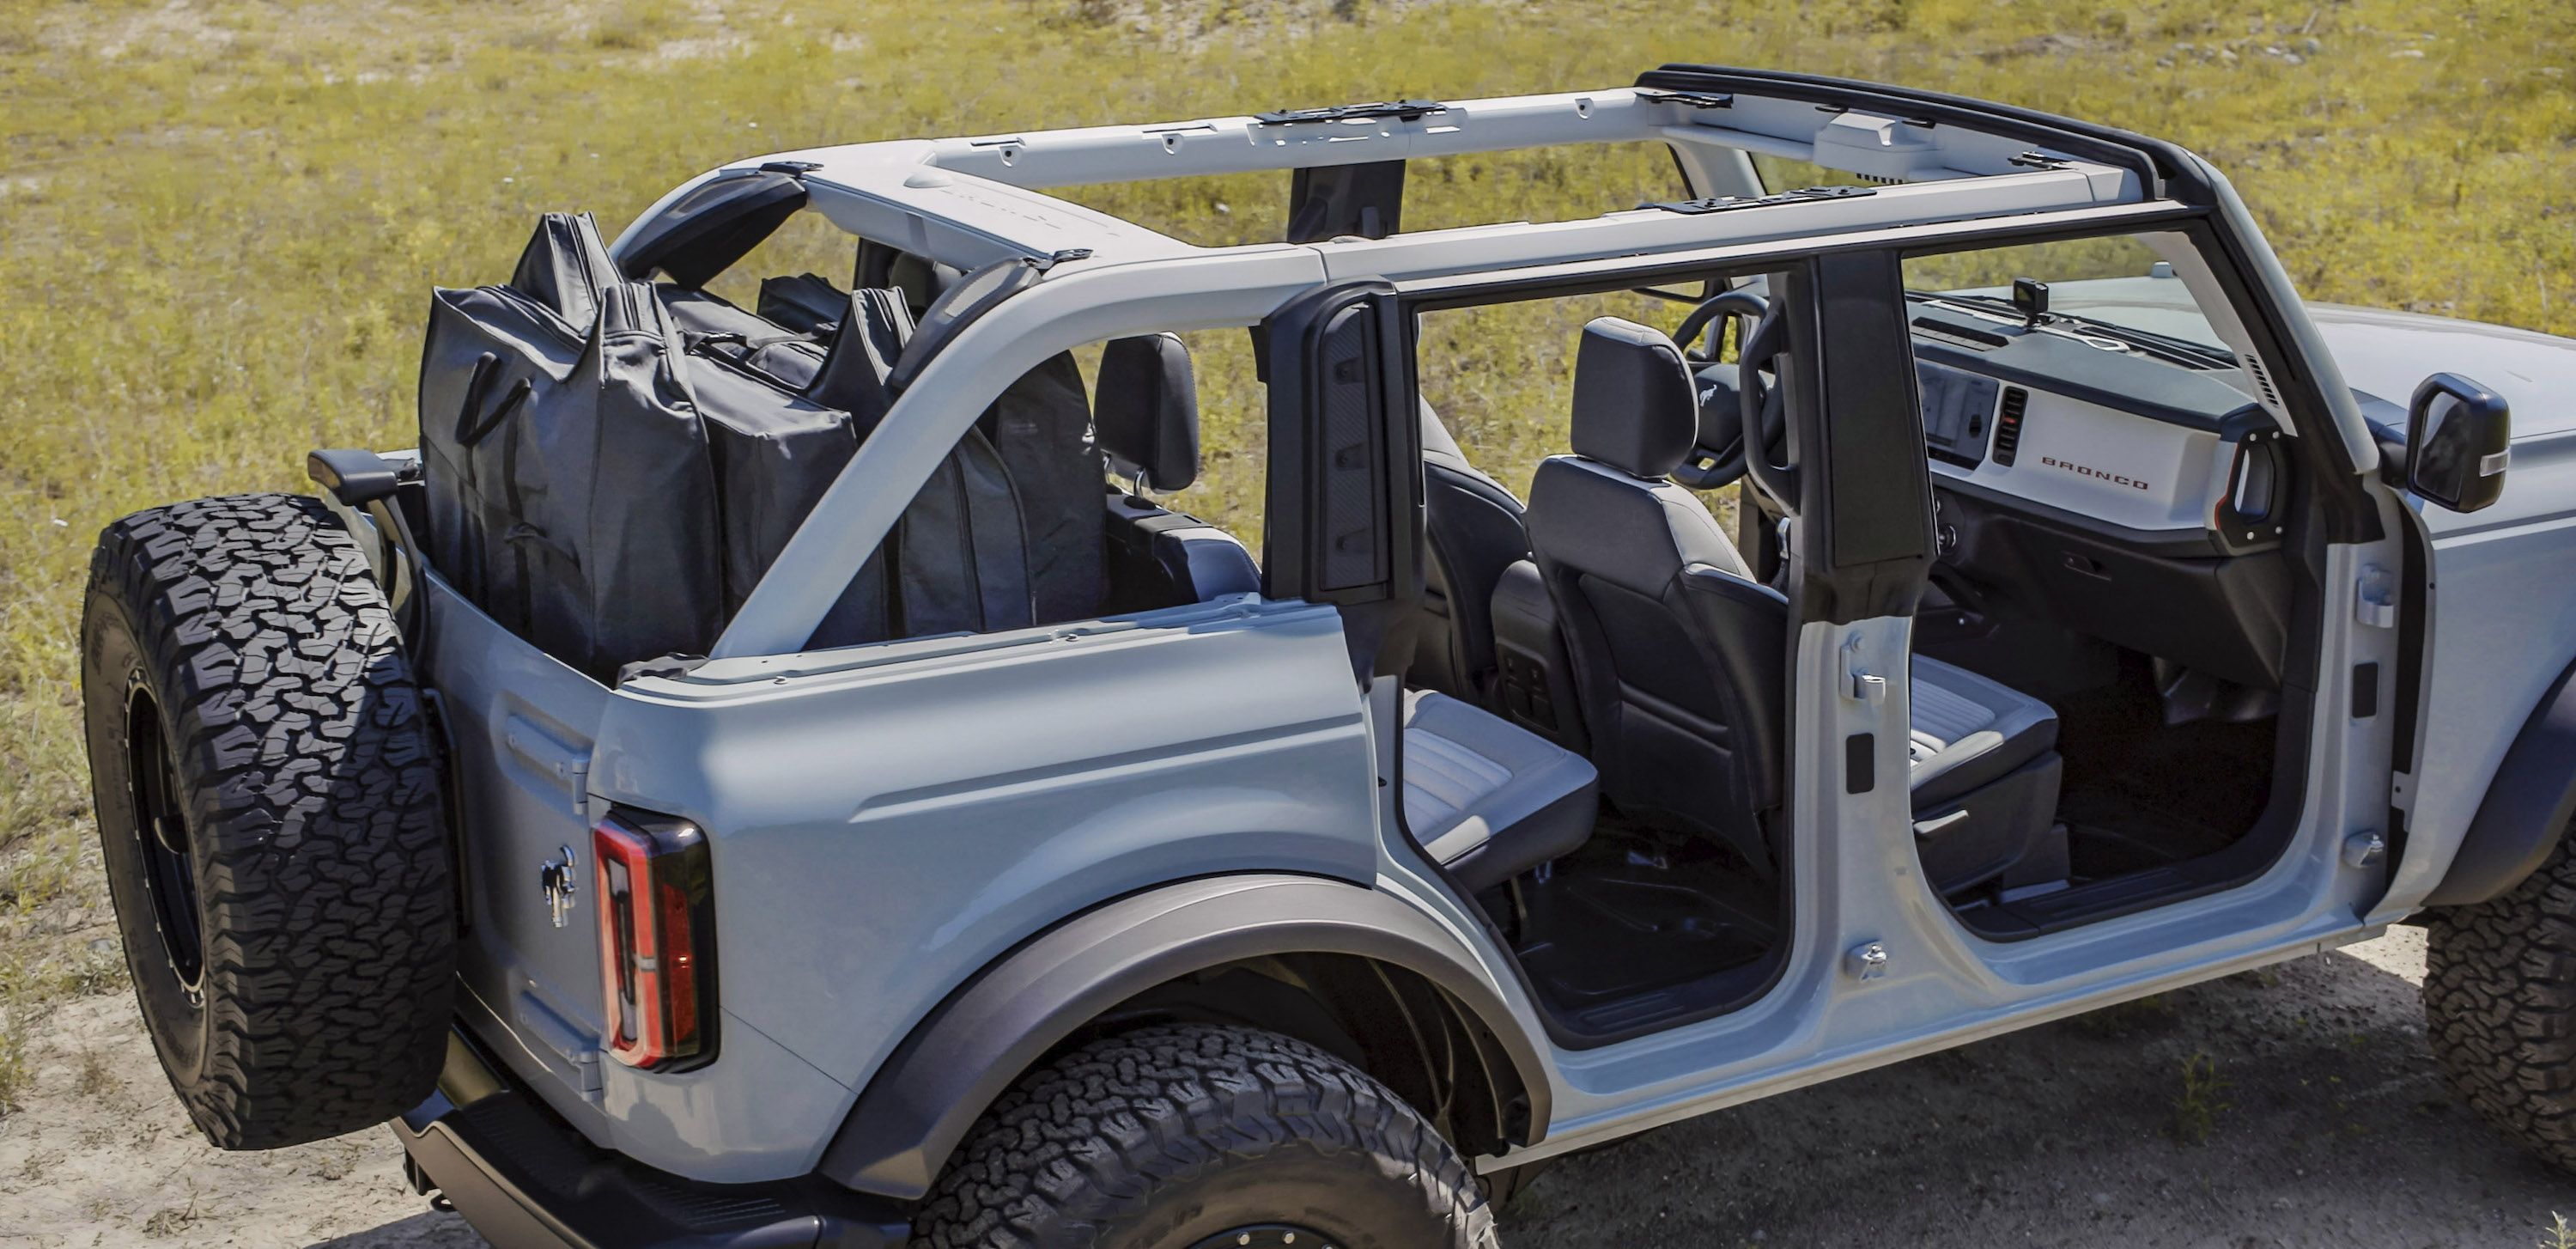 2021 Ford Bronco Doors Actually Fit In Trunk Unlike Wrangler